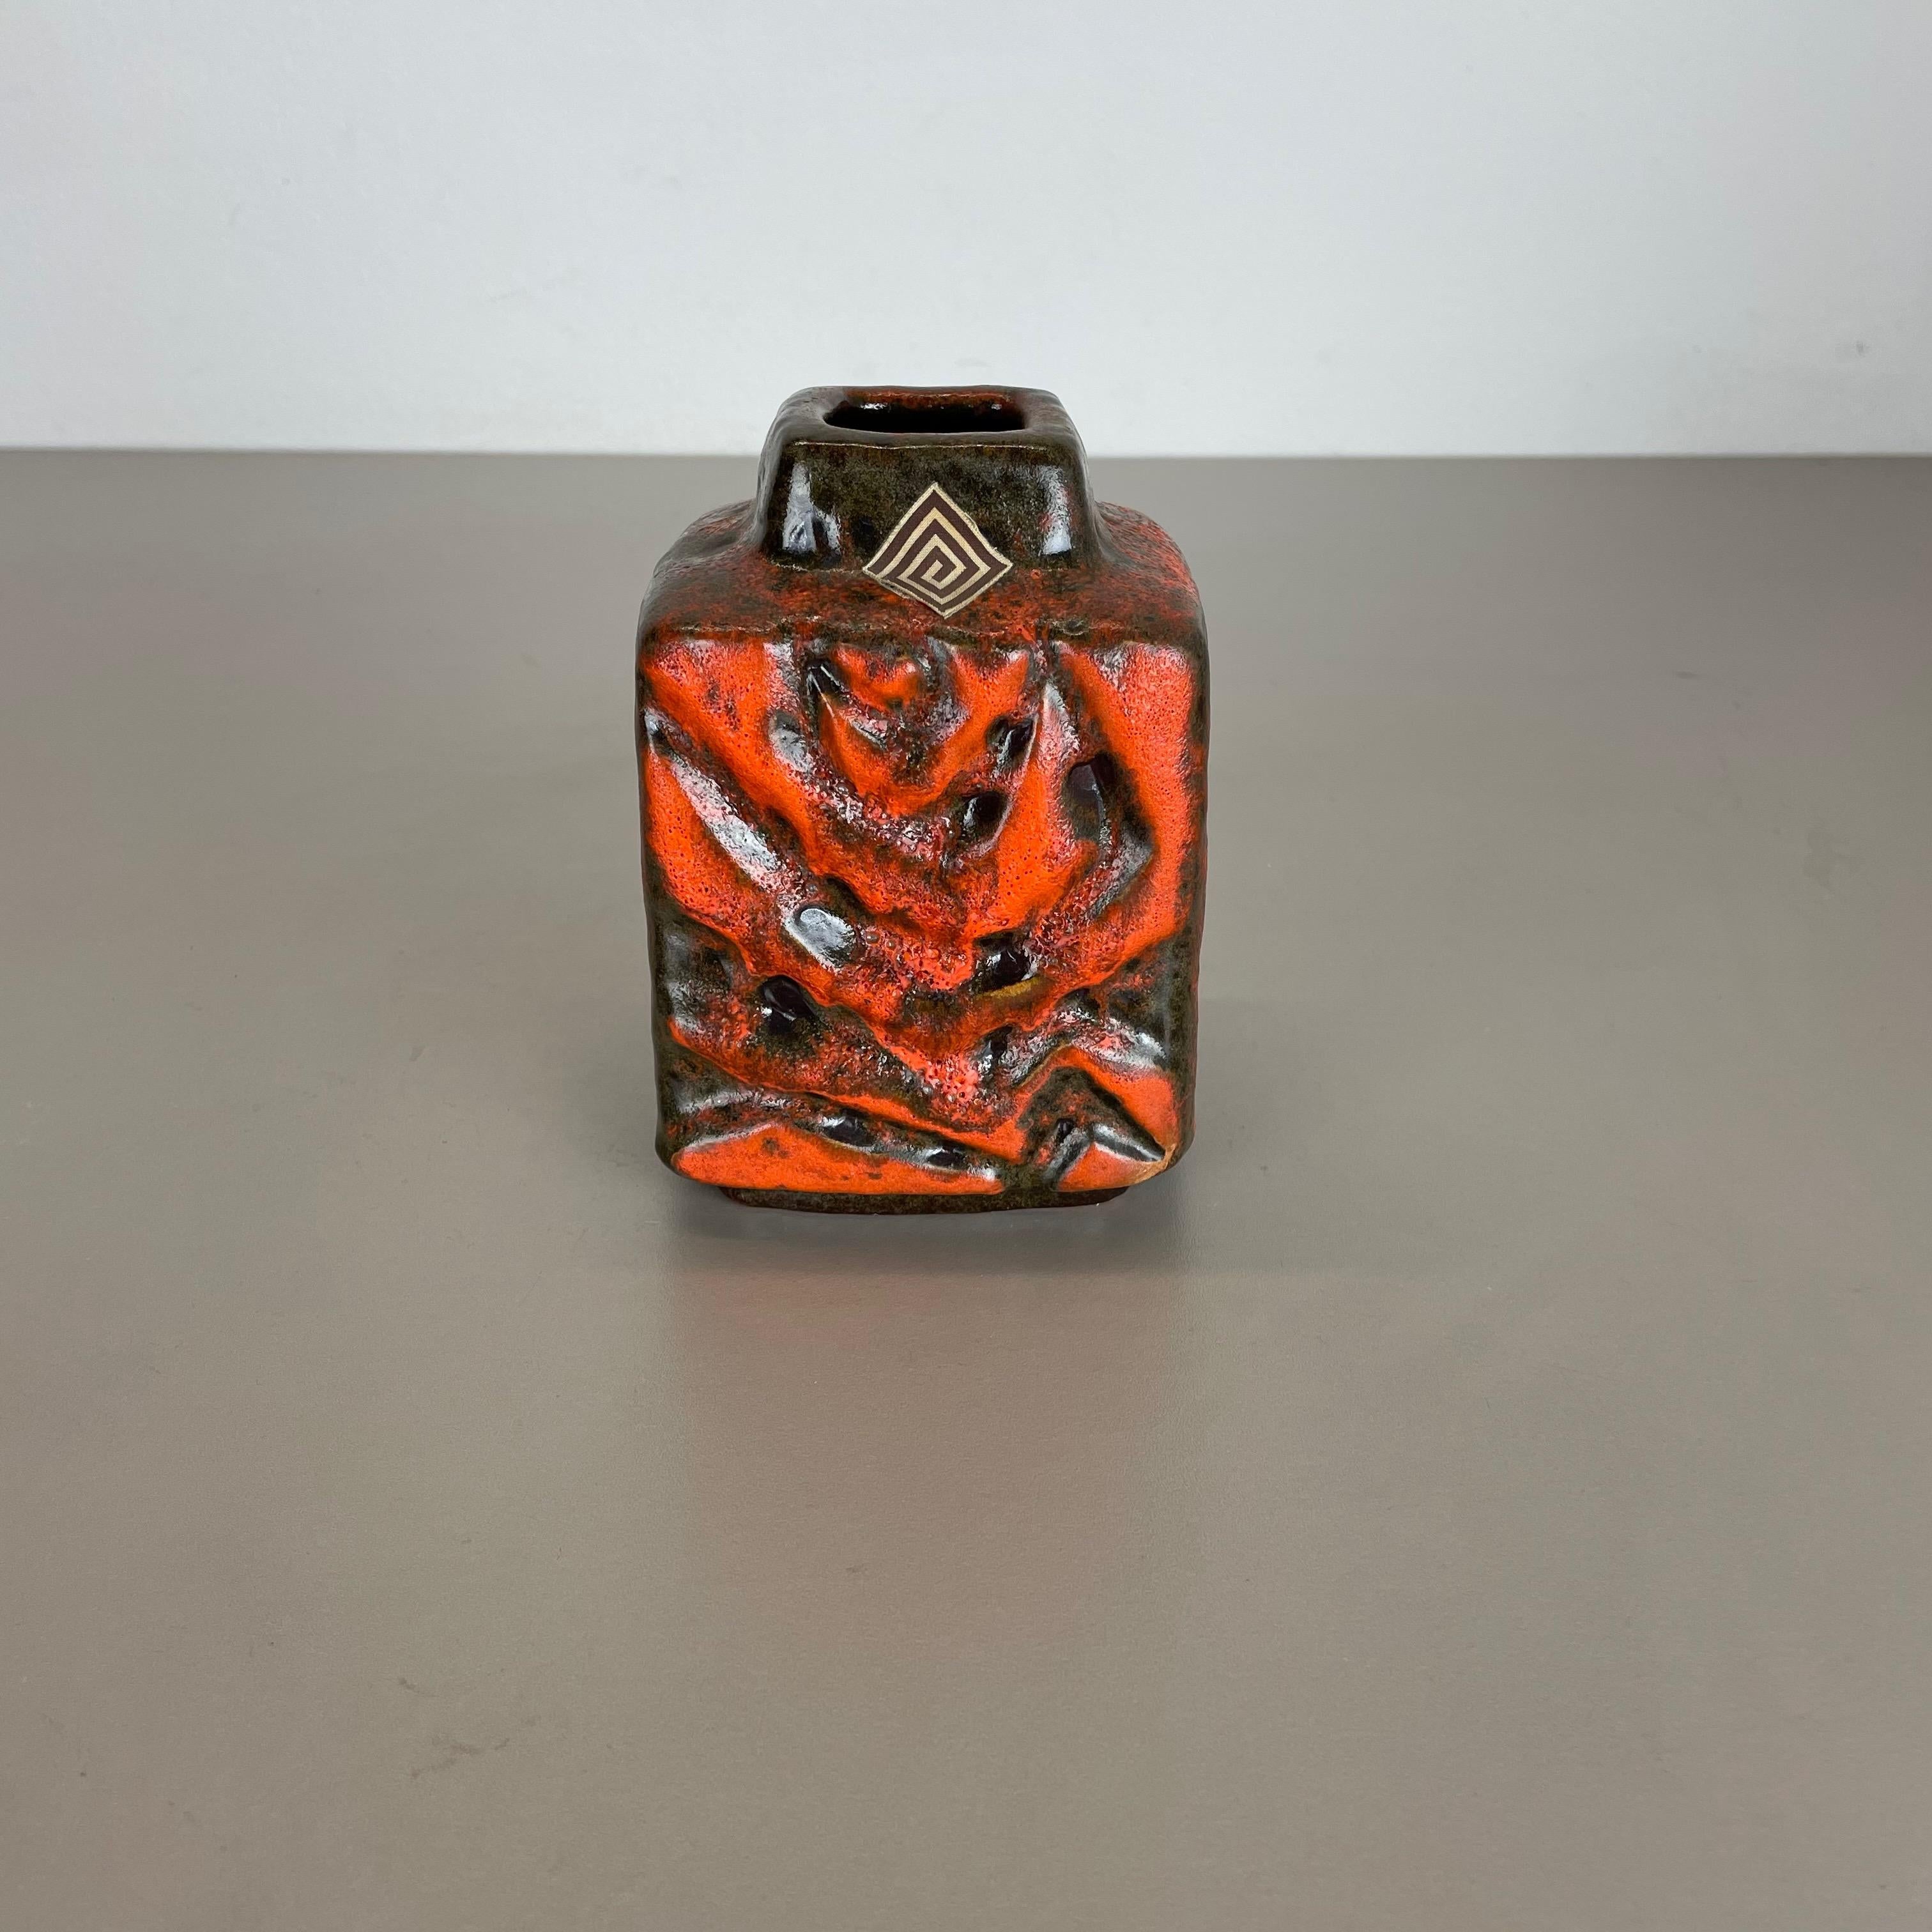 Article:

Ceramic pottery vase


Origin:

Germany



Producer:

Carstens Tönnieshof, Germany


Decade:

1970s


This original vintage pottery object was produced by Cartens Tönnieshof in the 1970s in Germany. It is made of